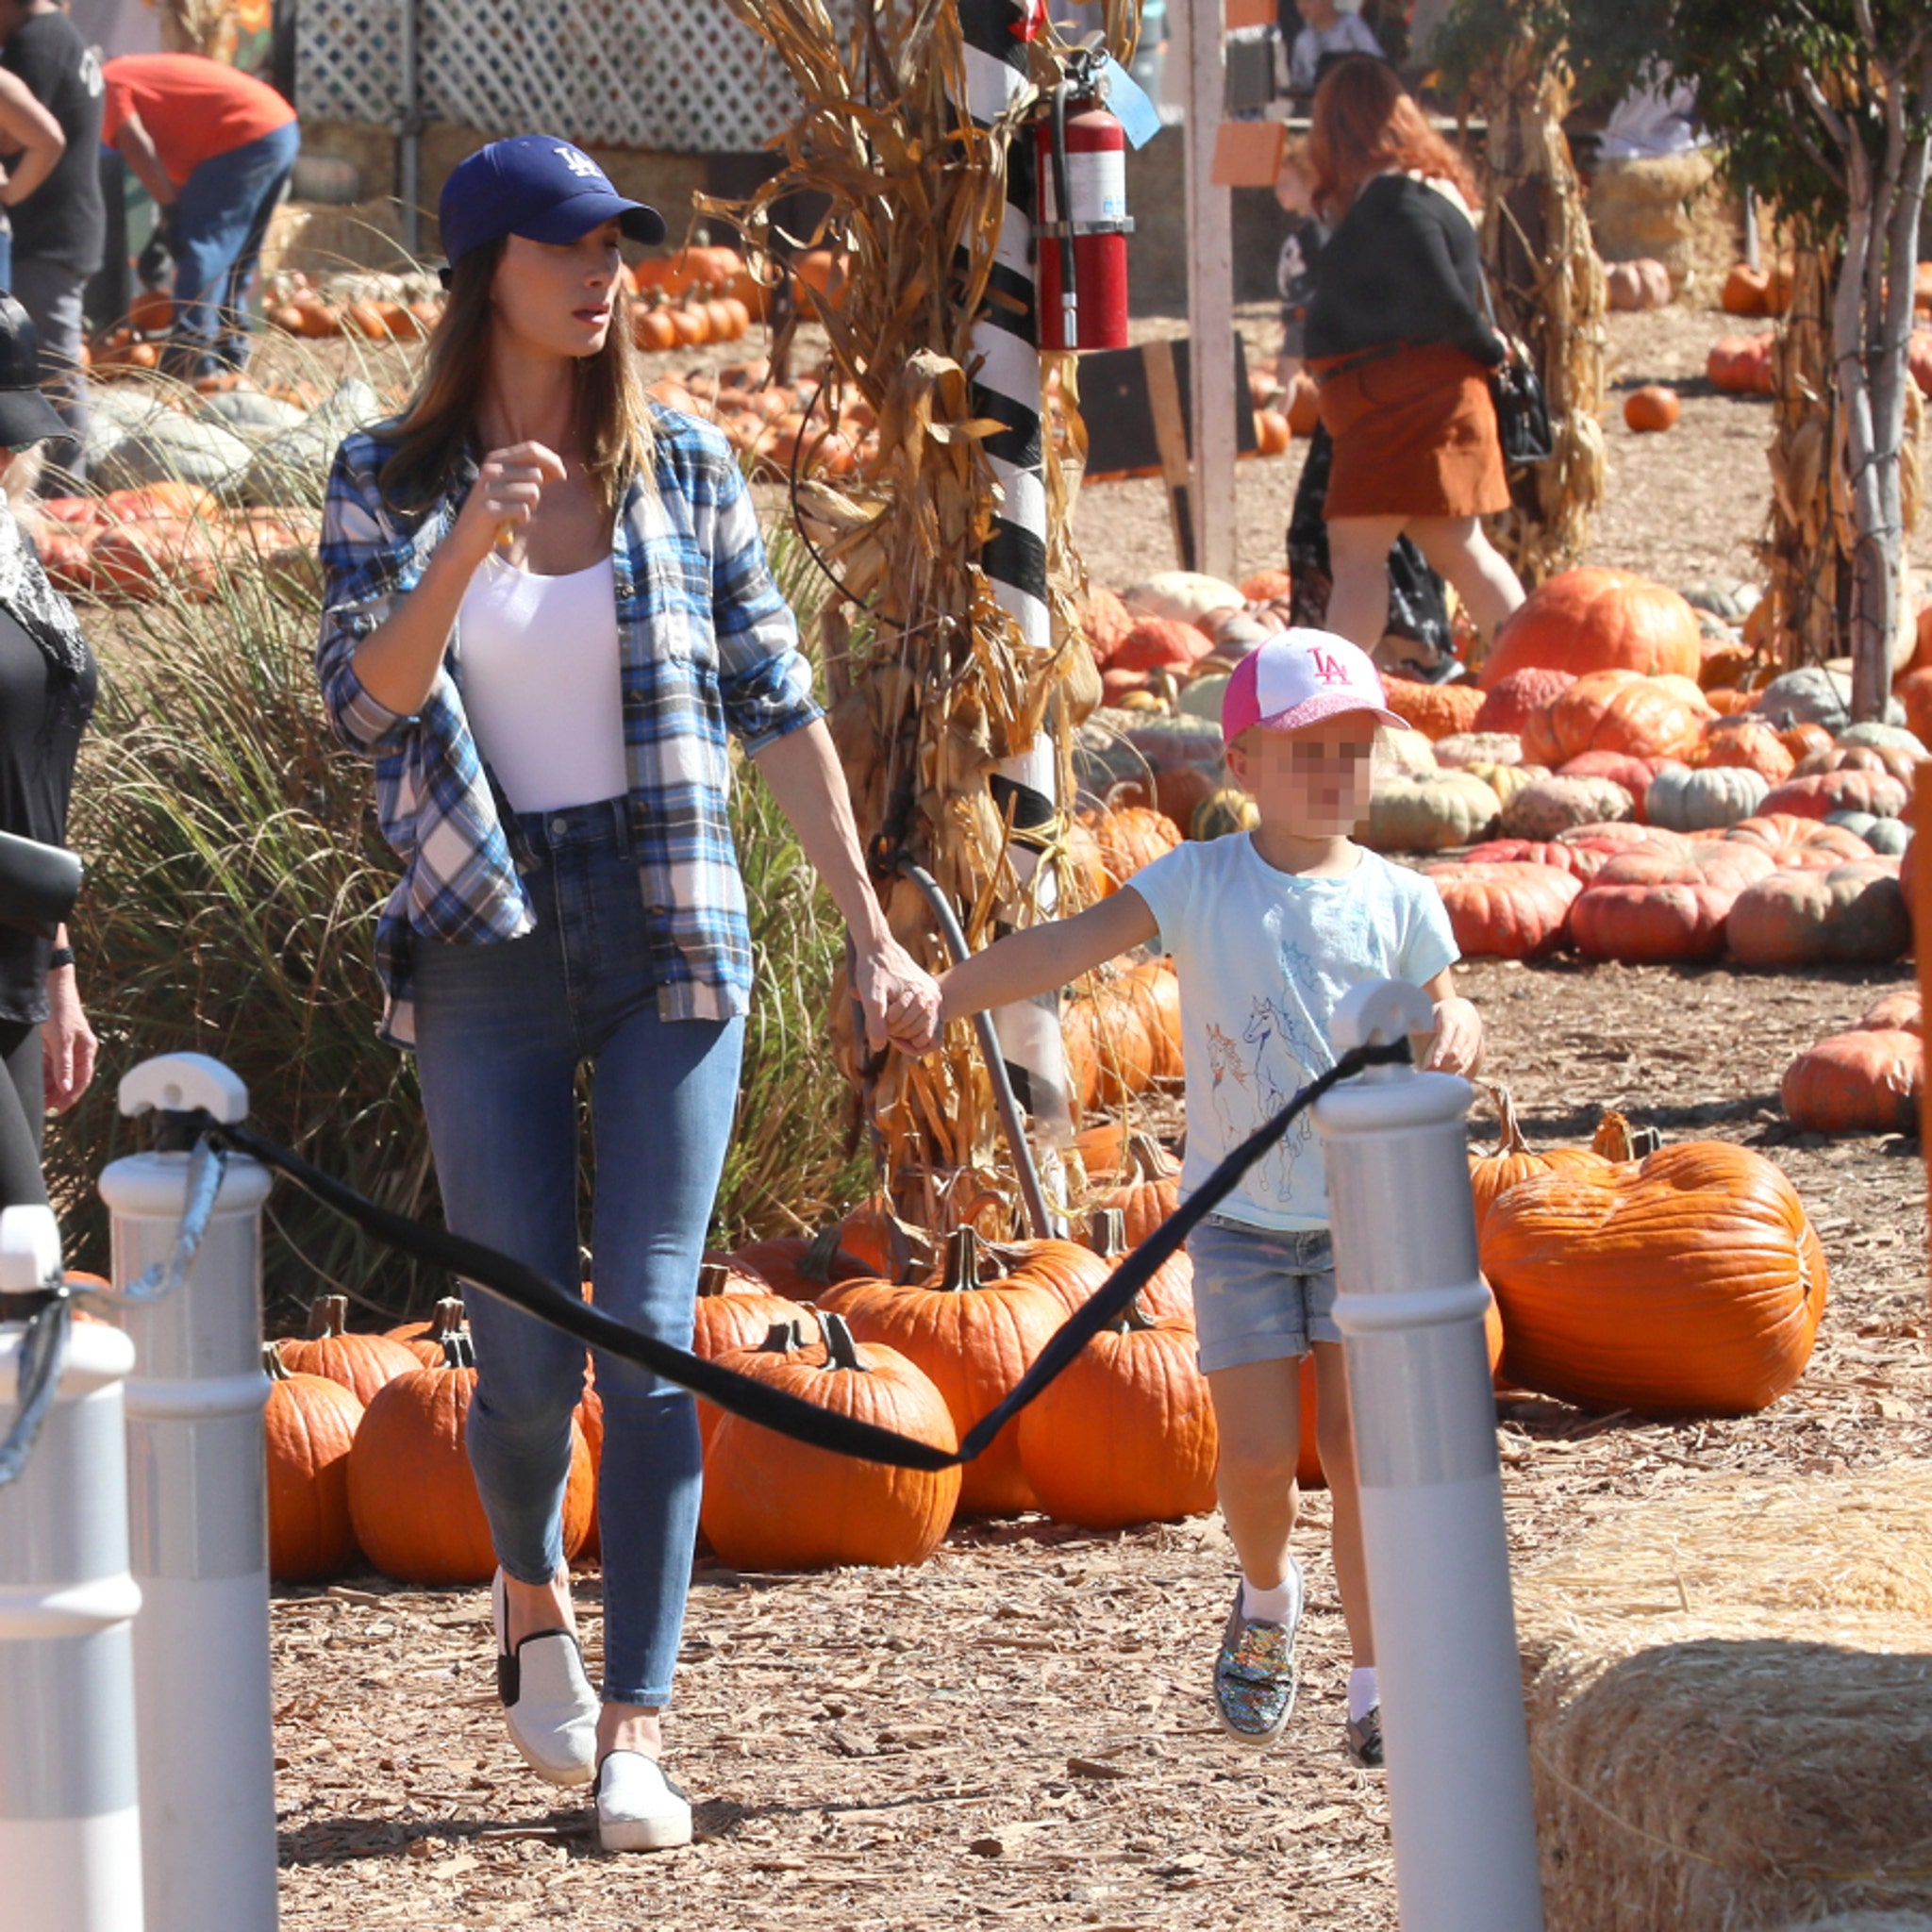 Jeremy Renners Ex Takes Daughter to Pumpkin Patch Amid Custody Battle